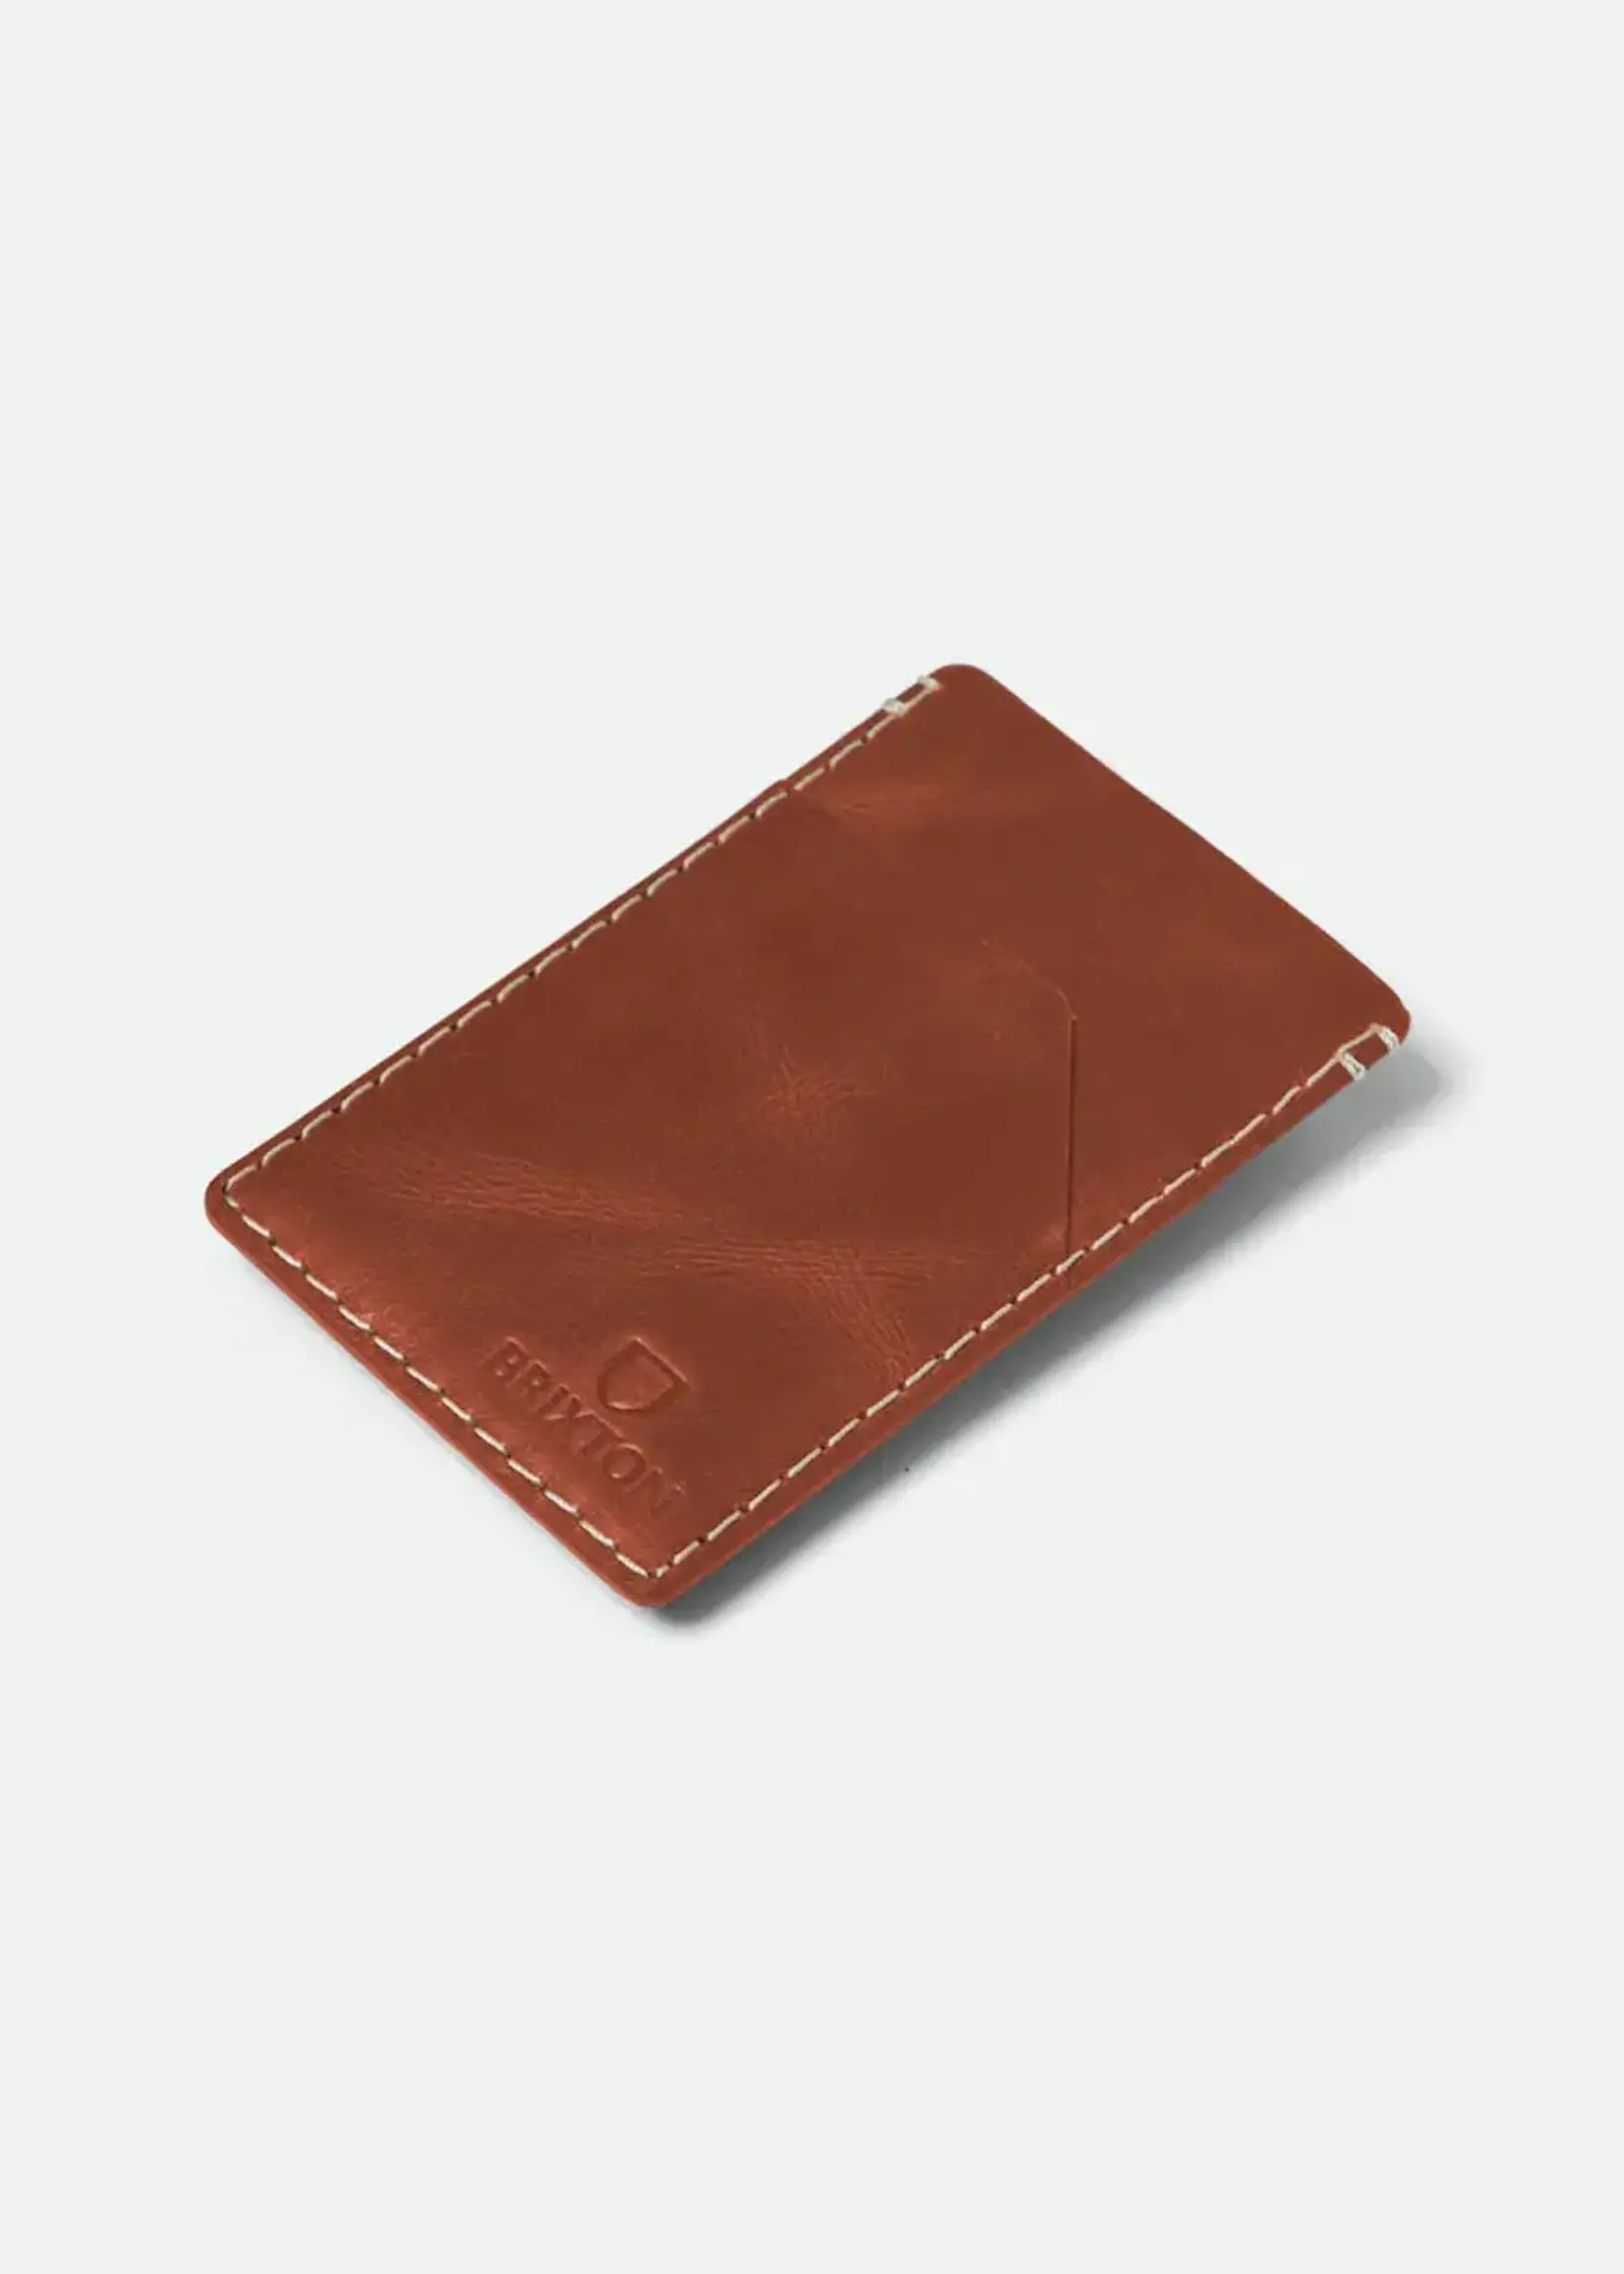 BRIXTON TRADITIONAL card leather holder